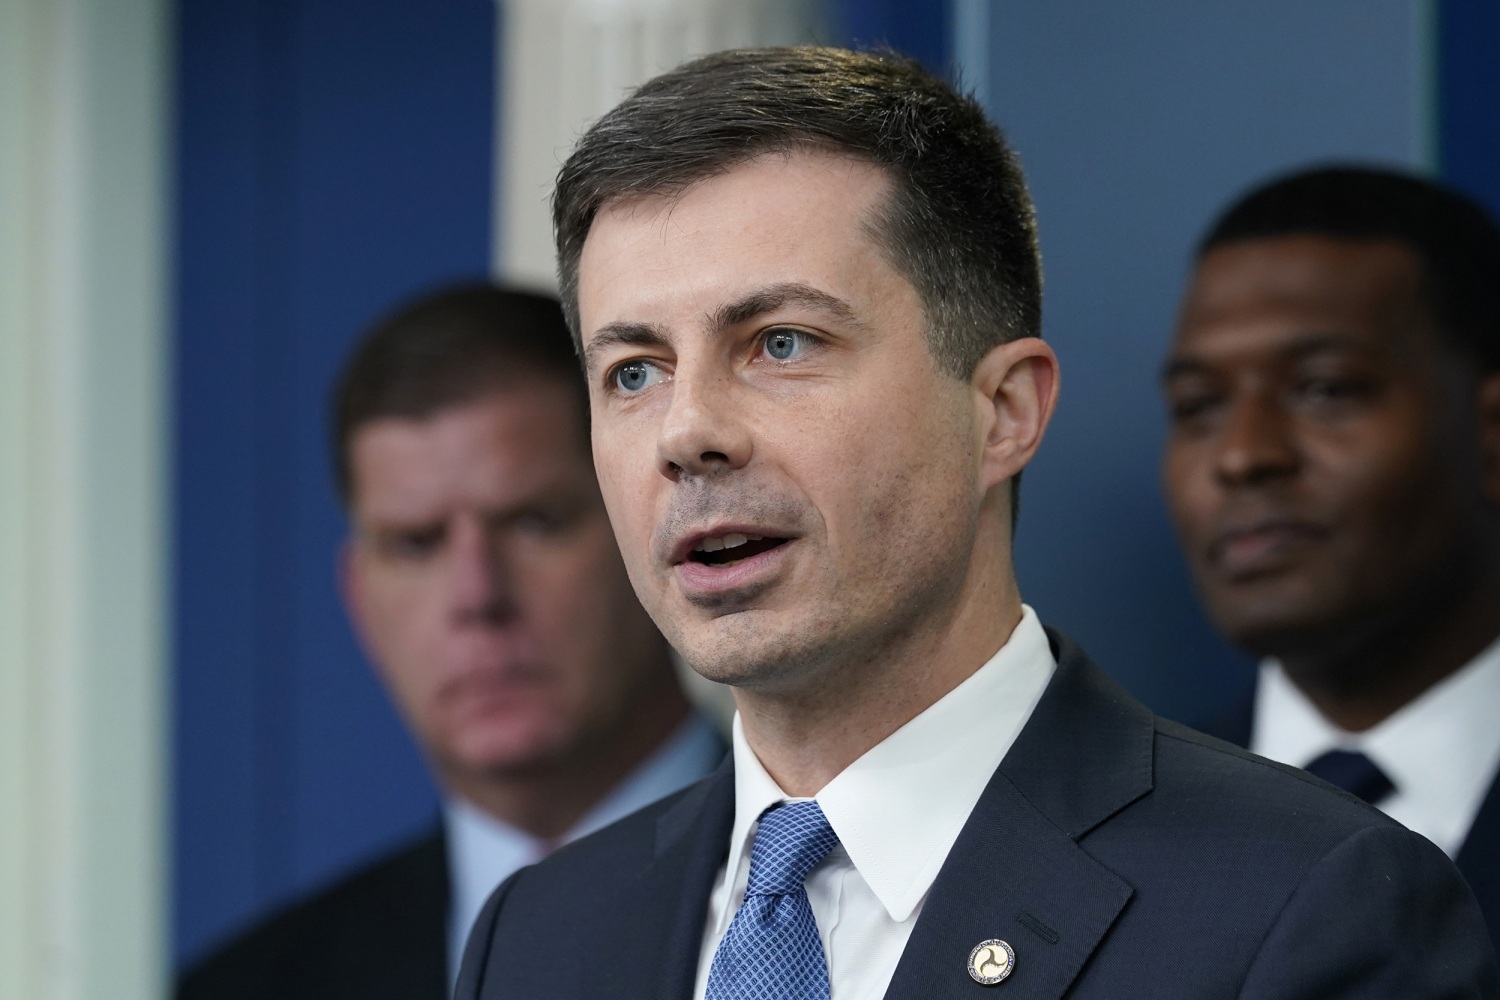 Pete Buttigieg faces crisis and opportunity as airline cancellations mount